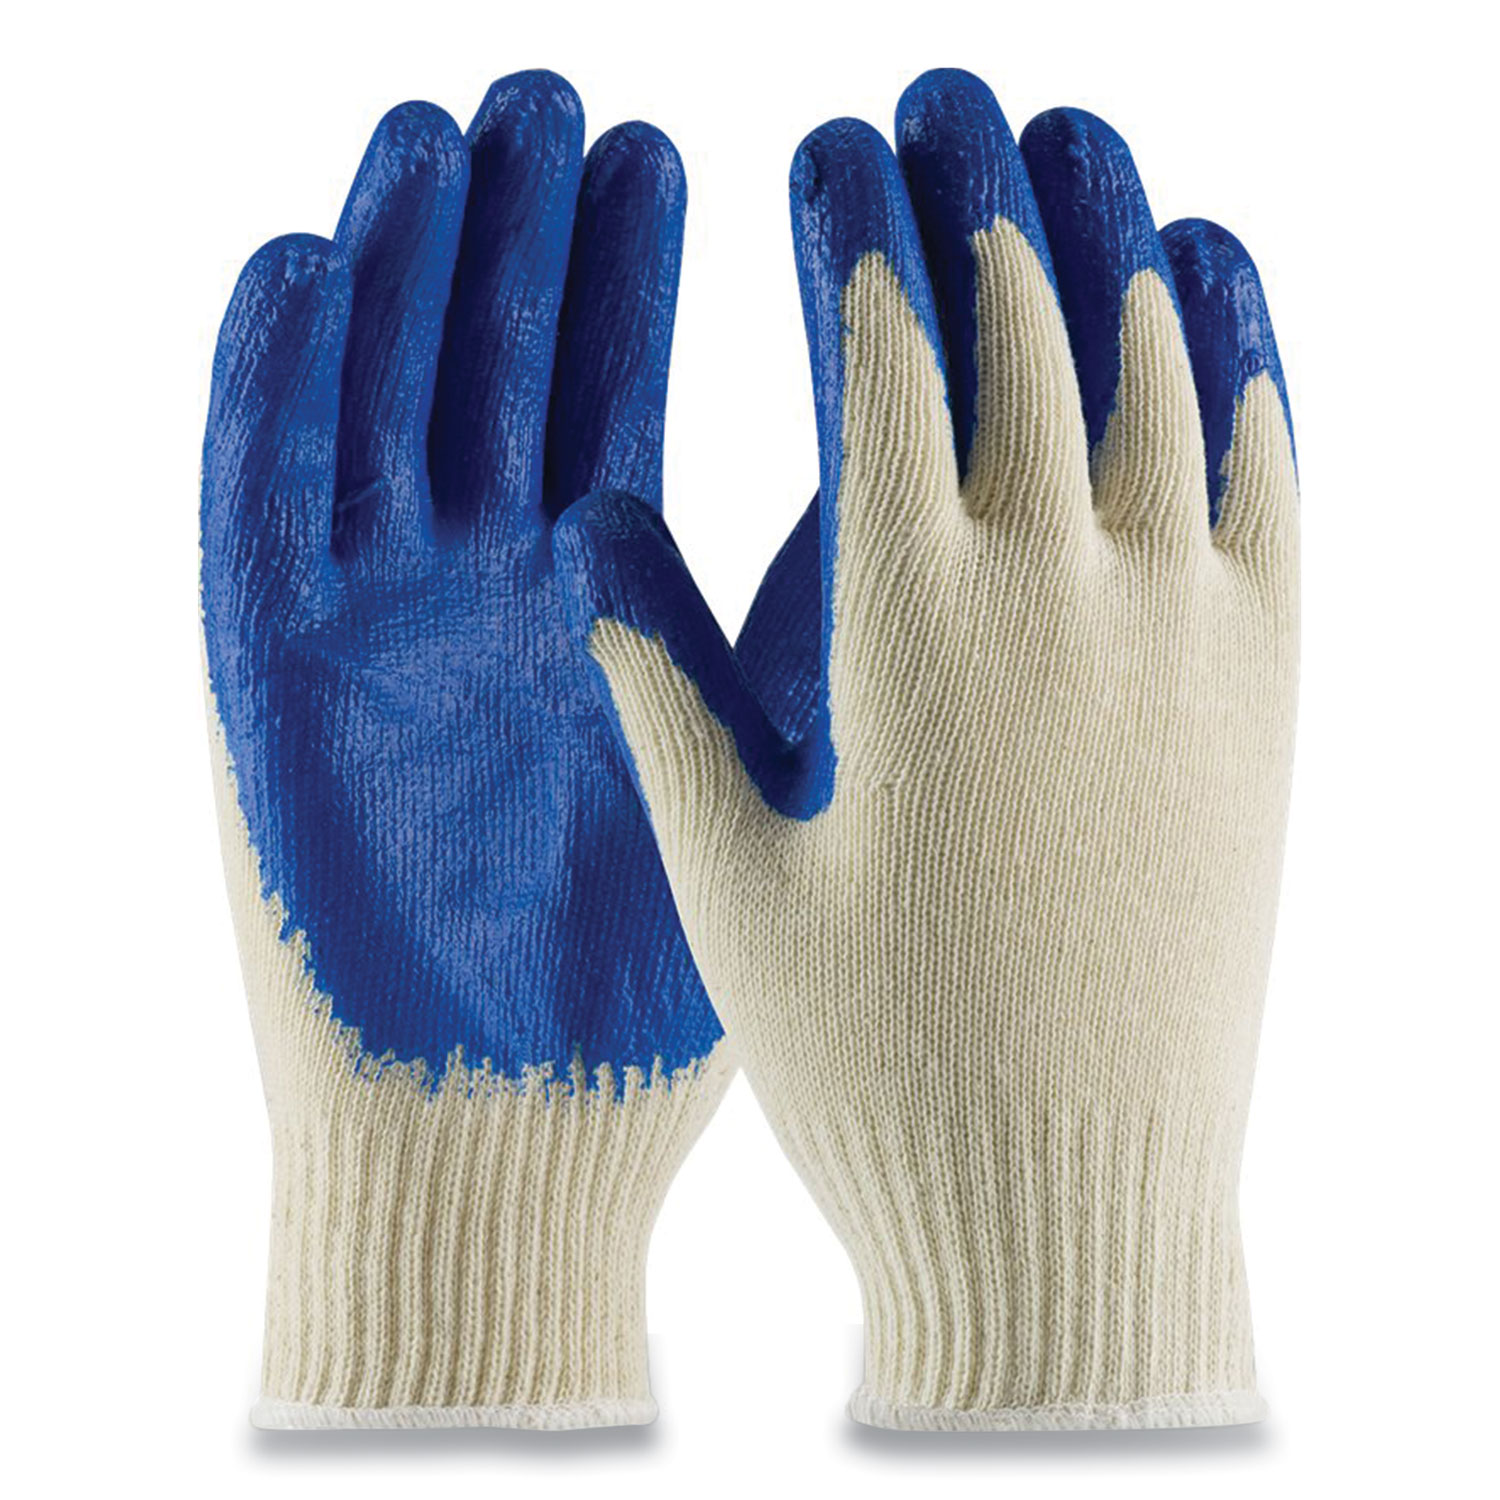 Seamless Knit Cotton/Polyester Gloves, Regular Grade, Small, White/Blue, 12 Pairs